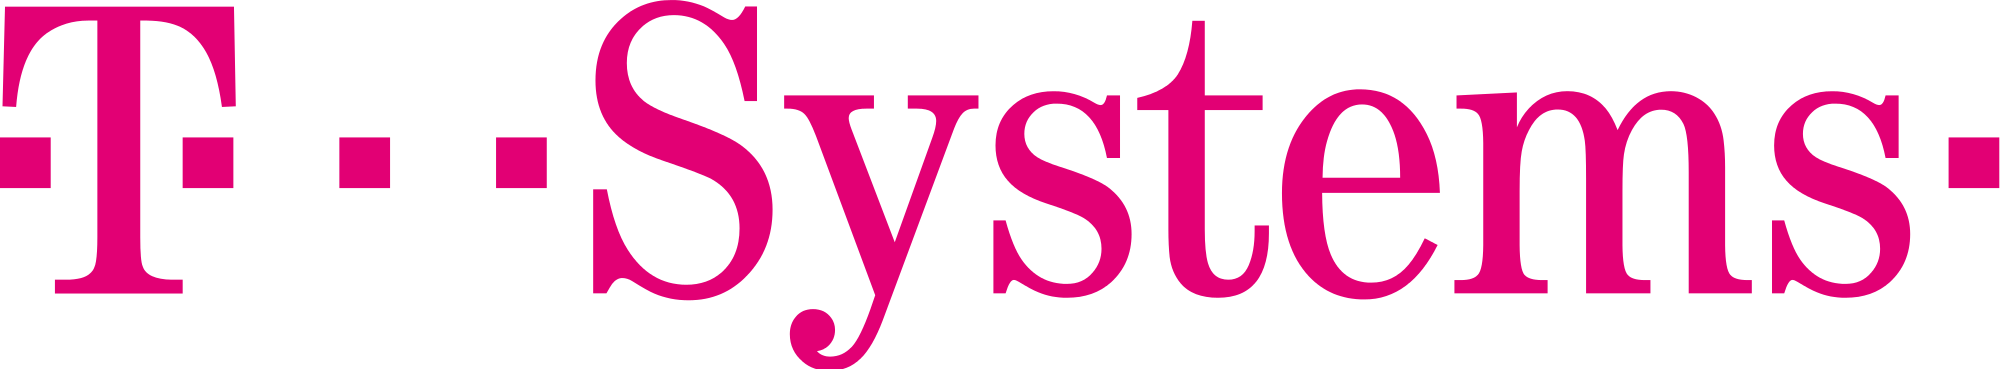 Logo of T-Systems